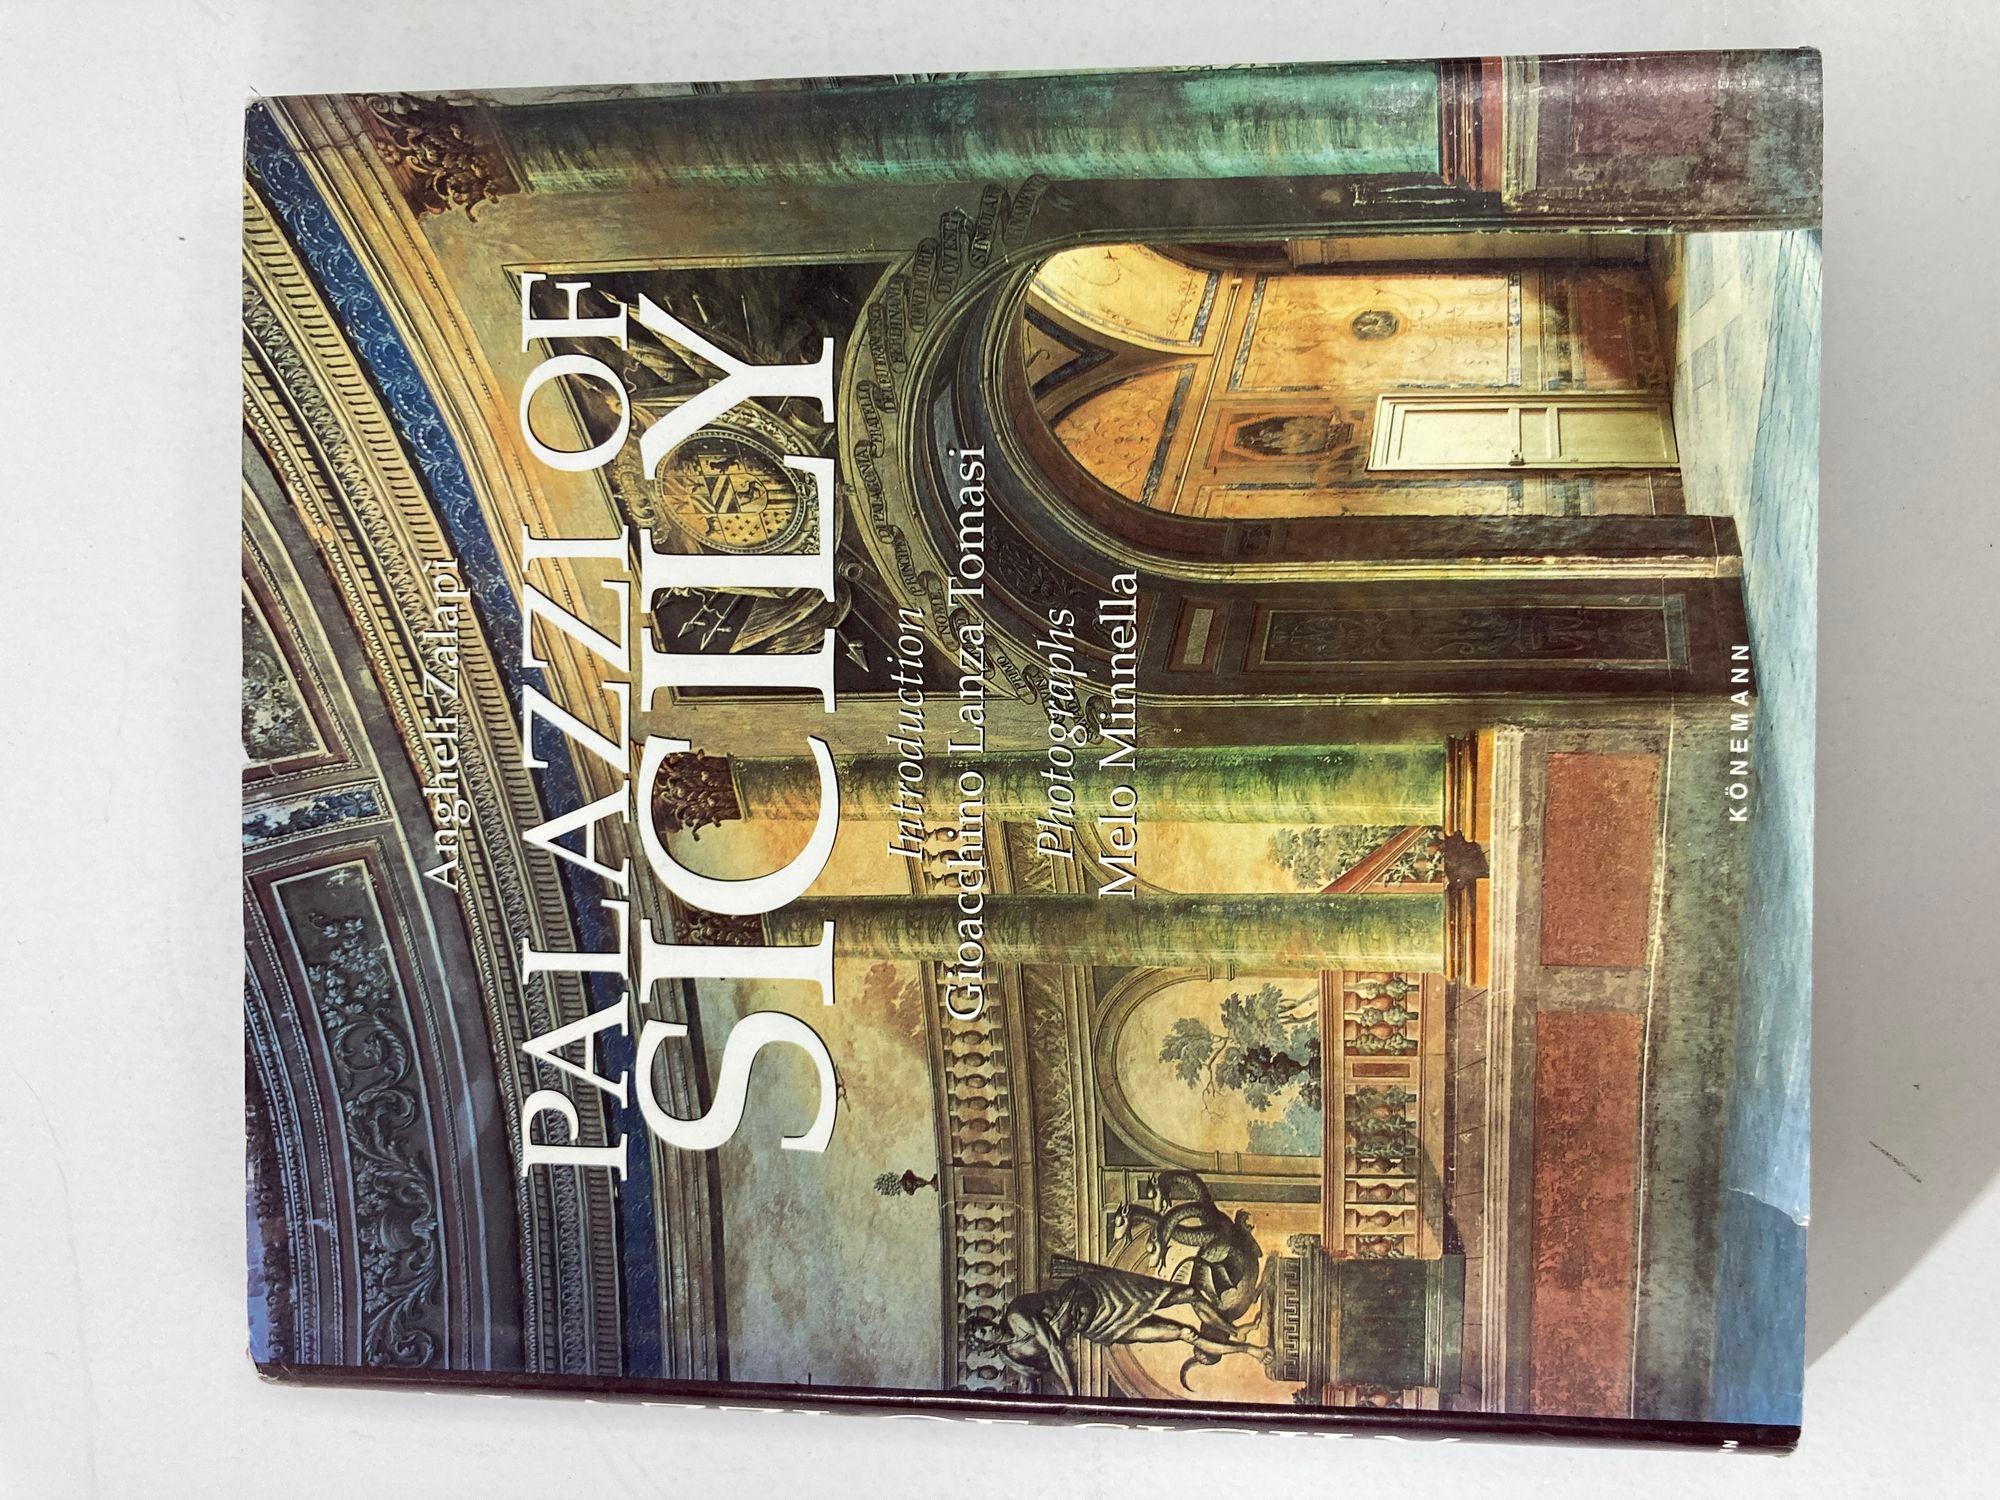 Baroque Palazzi of Sicily by Angheli Zalapi Hardcover Book, Italy For Sale